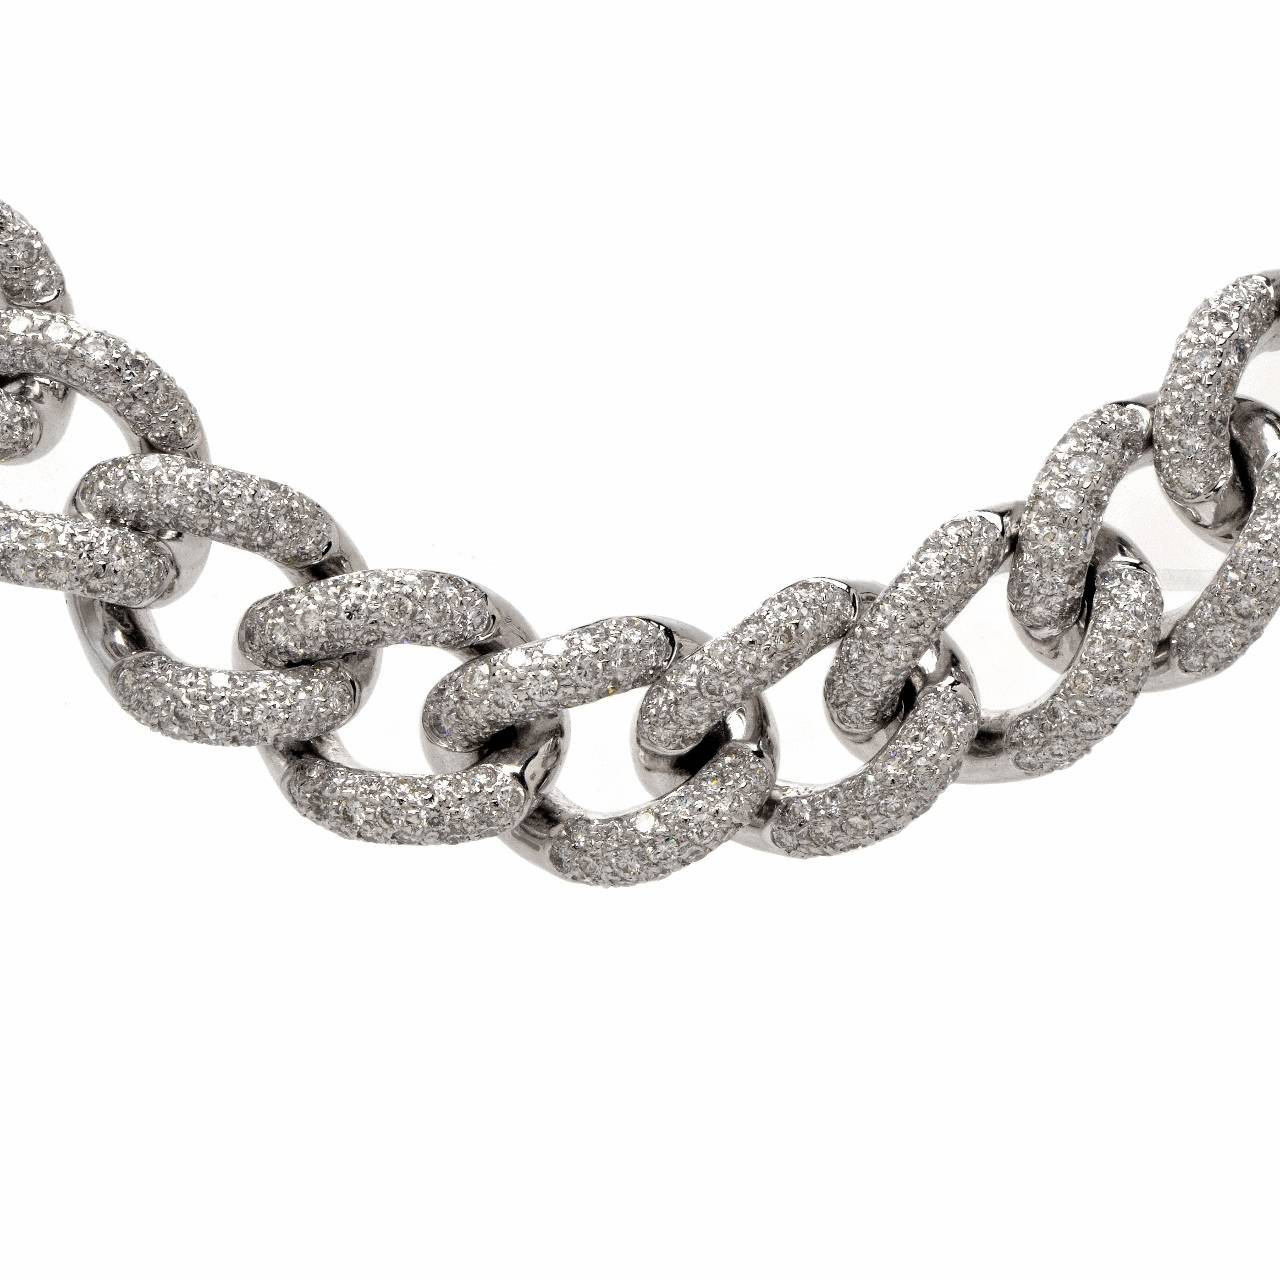 This estate heavy chain necklace with pave diamonds is crafted in solid 18K white gold, weighs 130.9 grams and measures 15